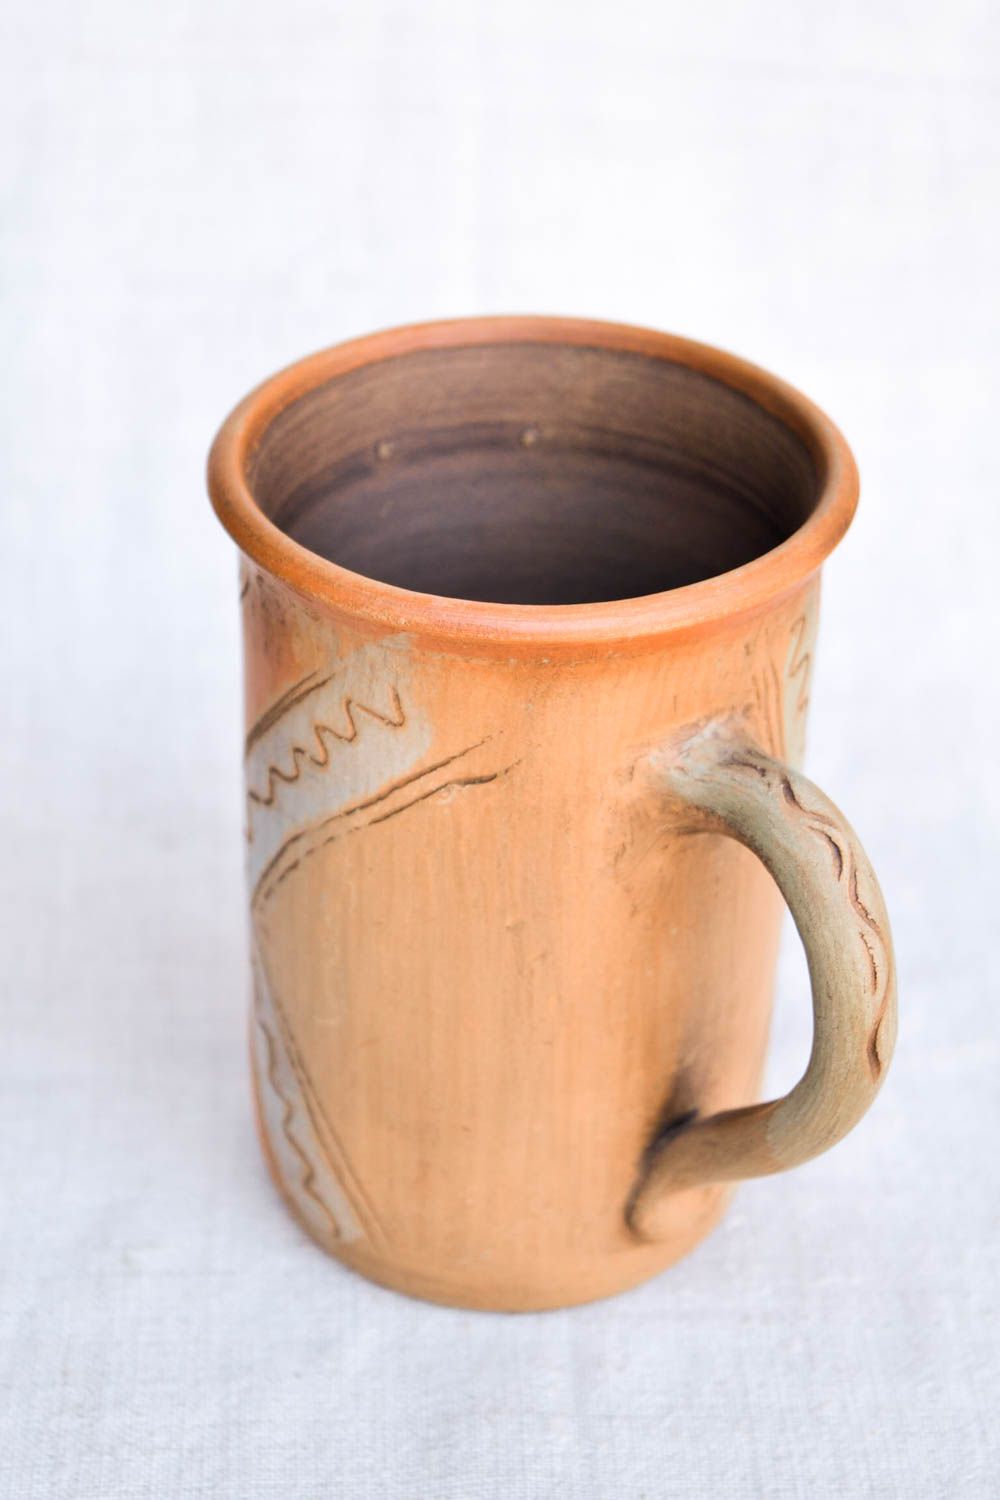 XL 12 oz clay tall teacup in olive, brown color and handle photo 5